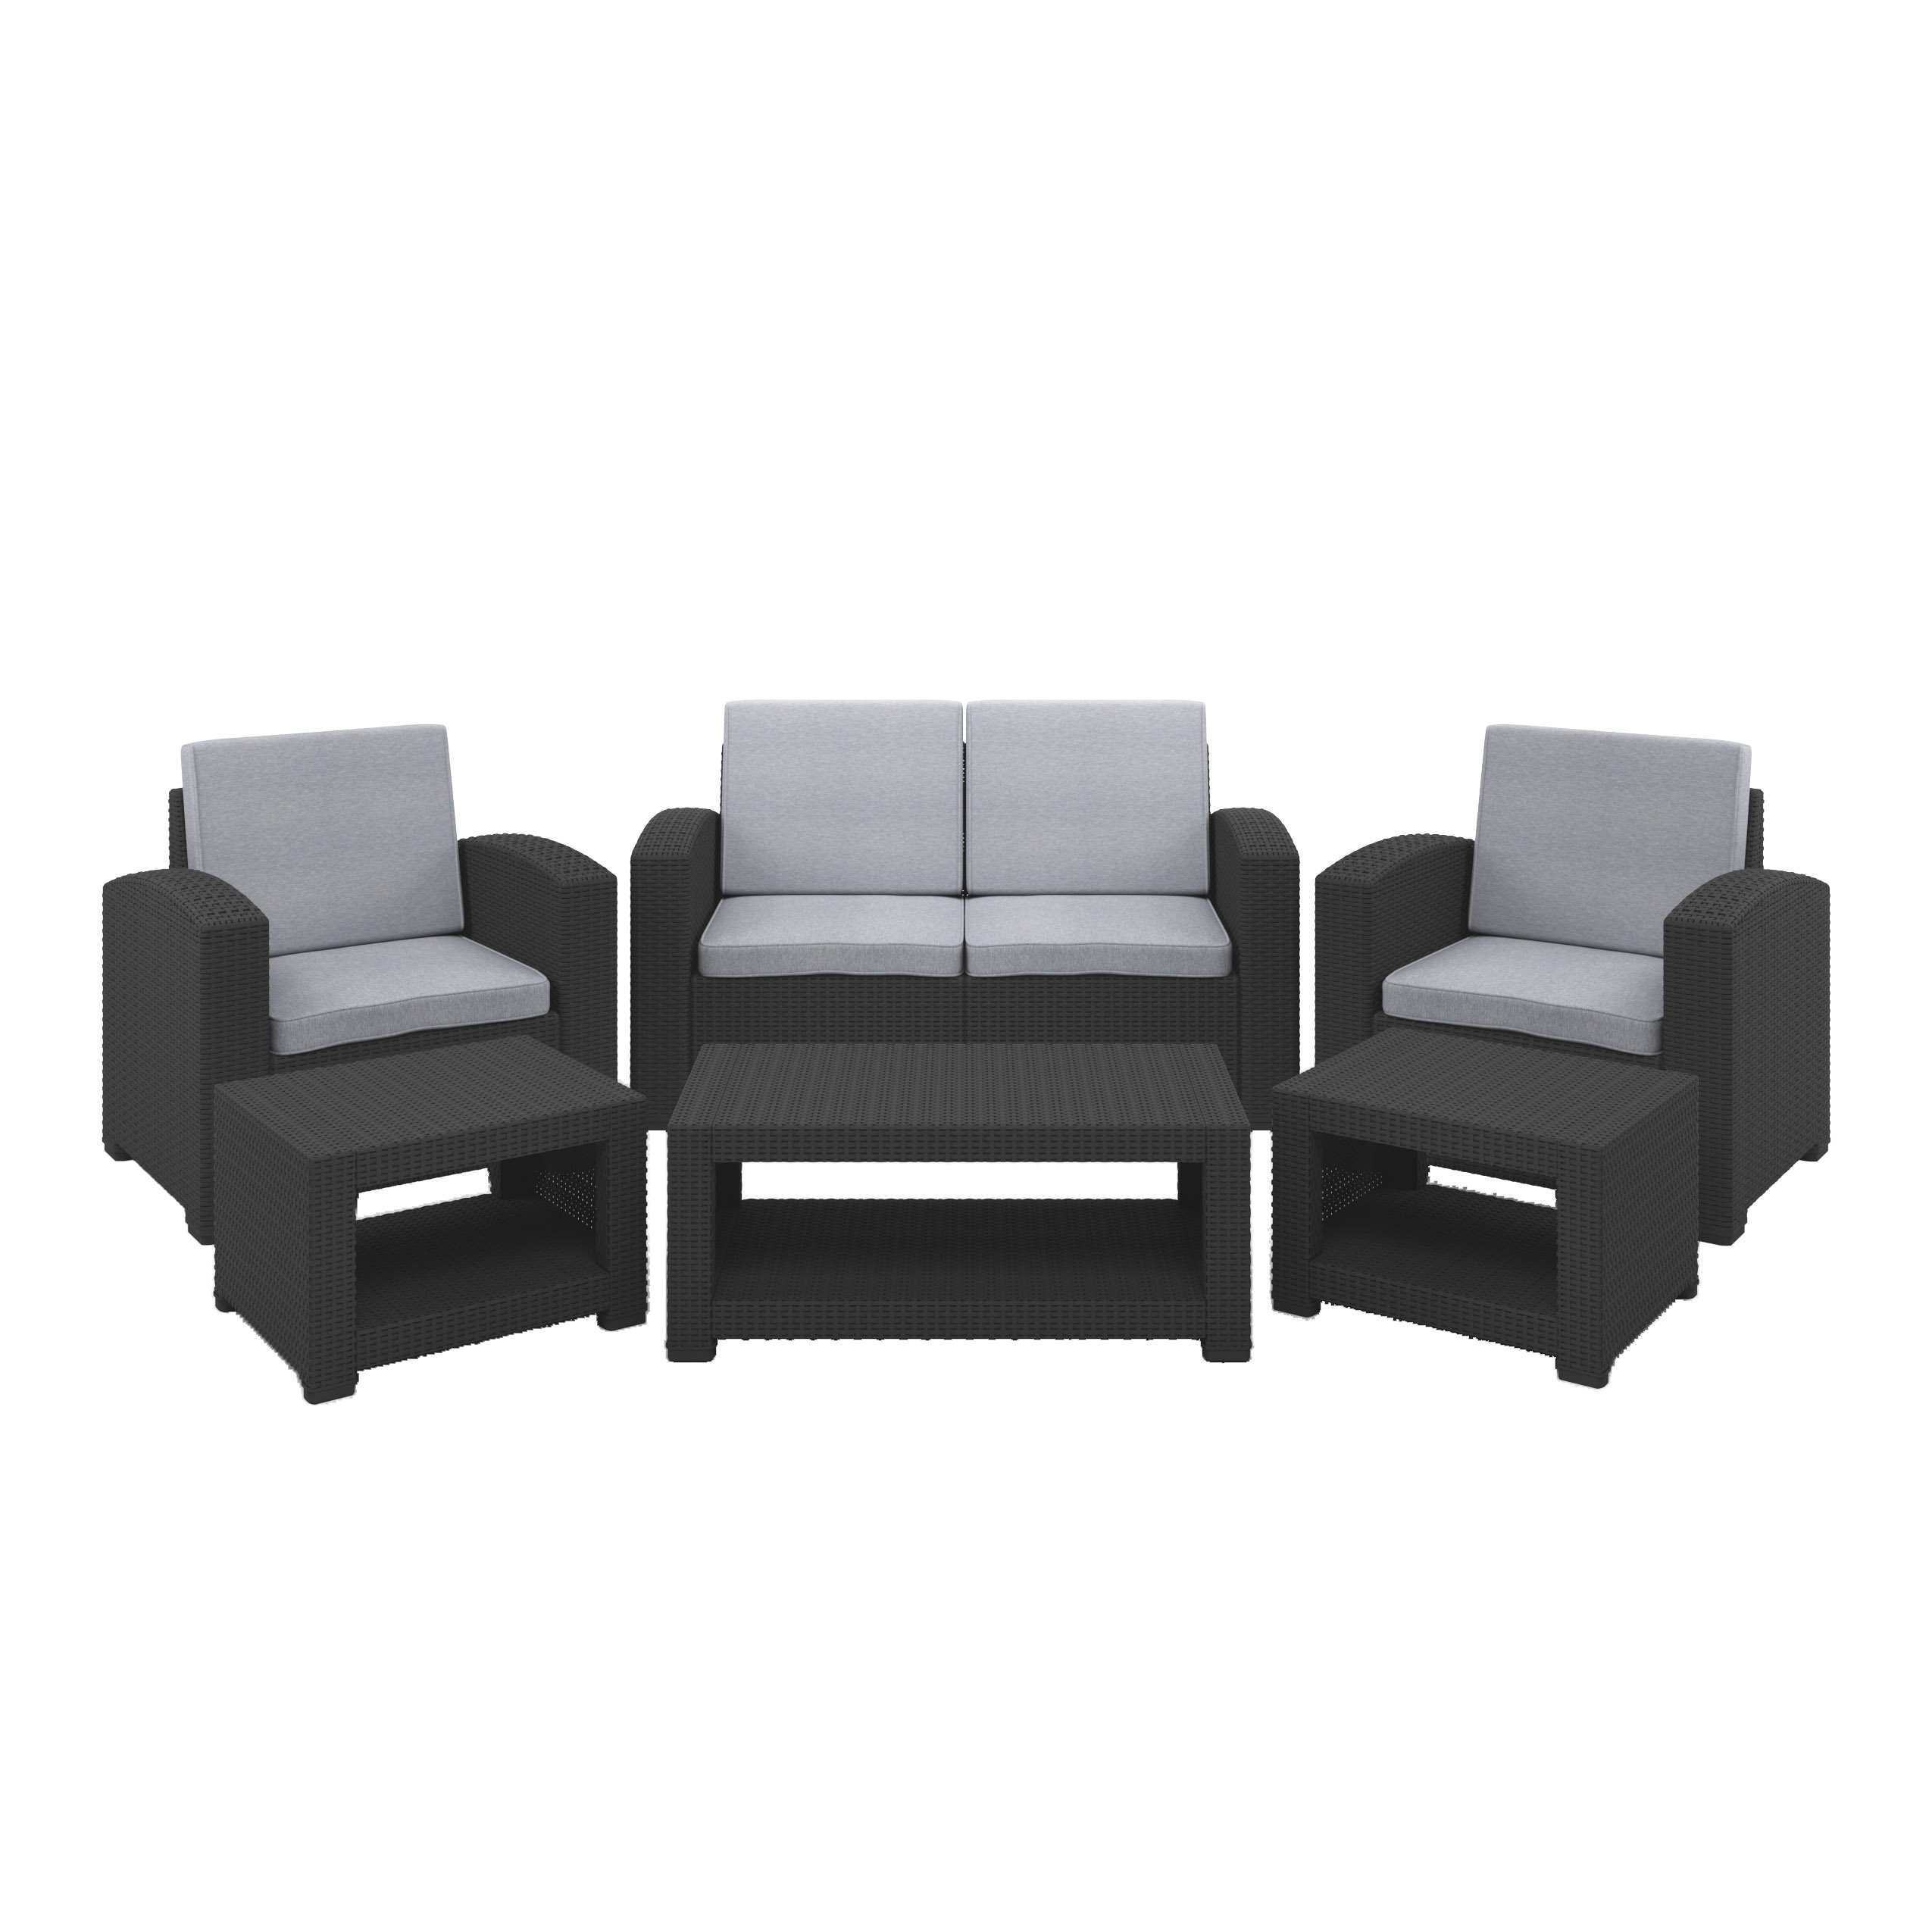 CorLiving All-Weather 6pc Patio Conversation Set - image 1 of 11